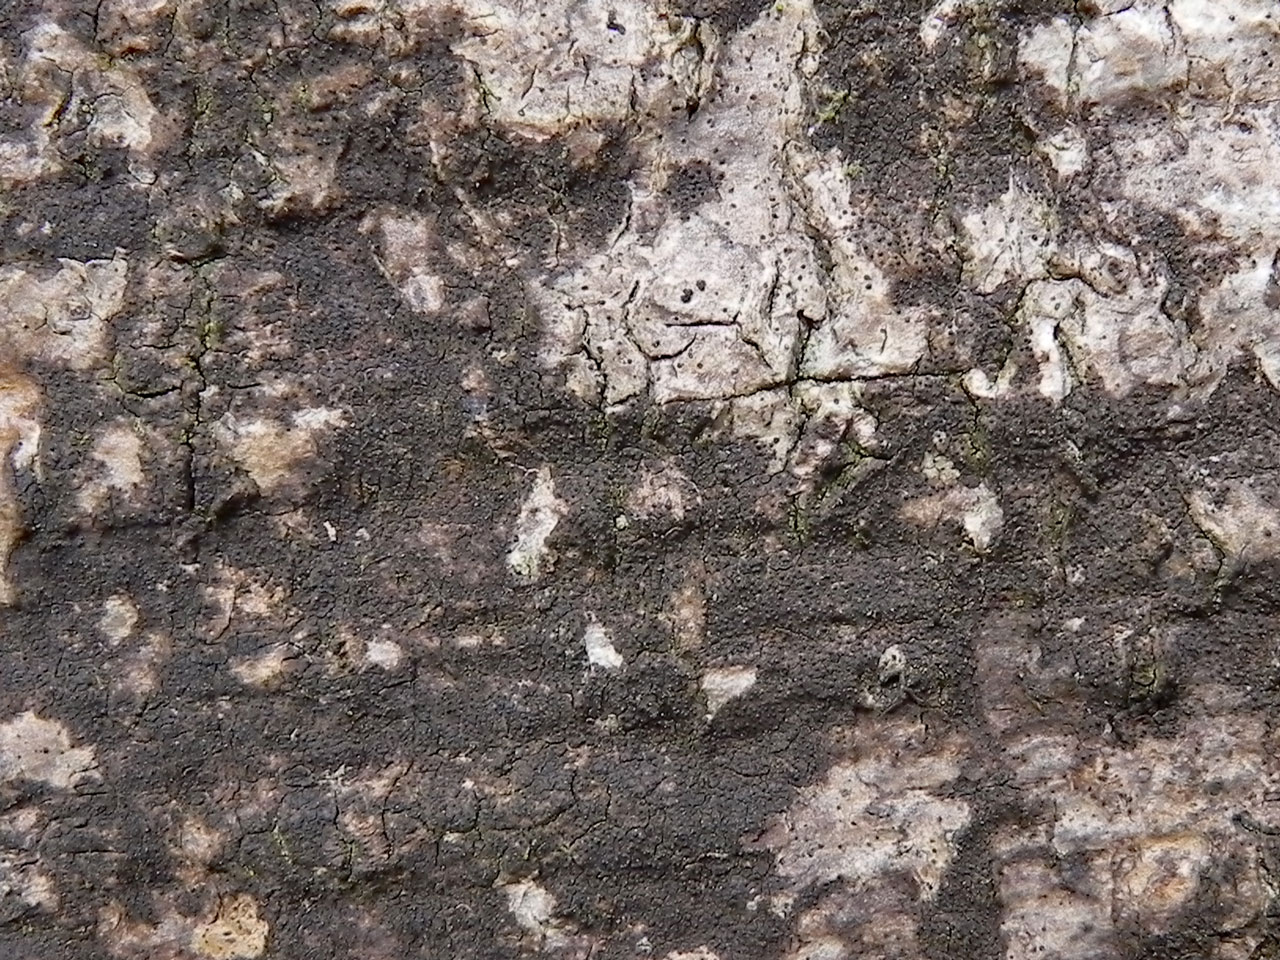 Dichoporis taylorii, wound on Beech, Shave Wood, New Forest